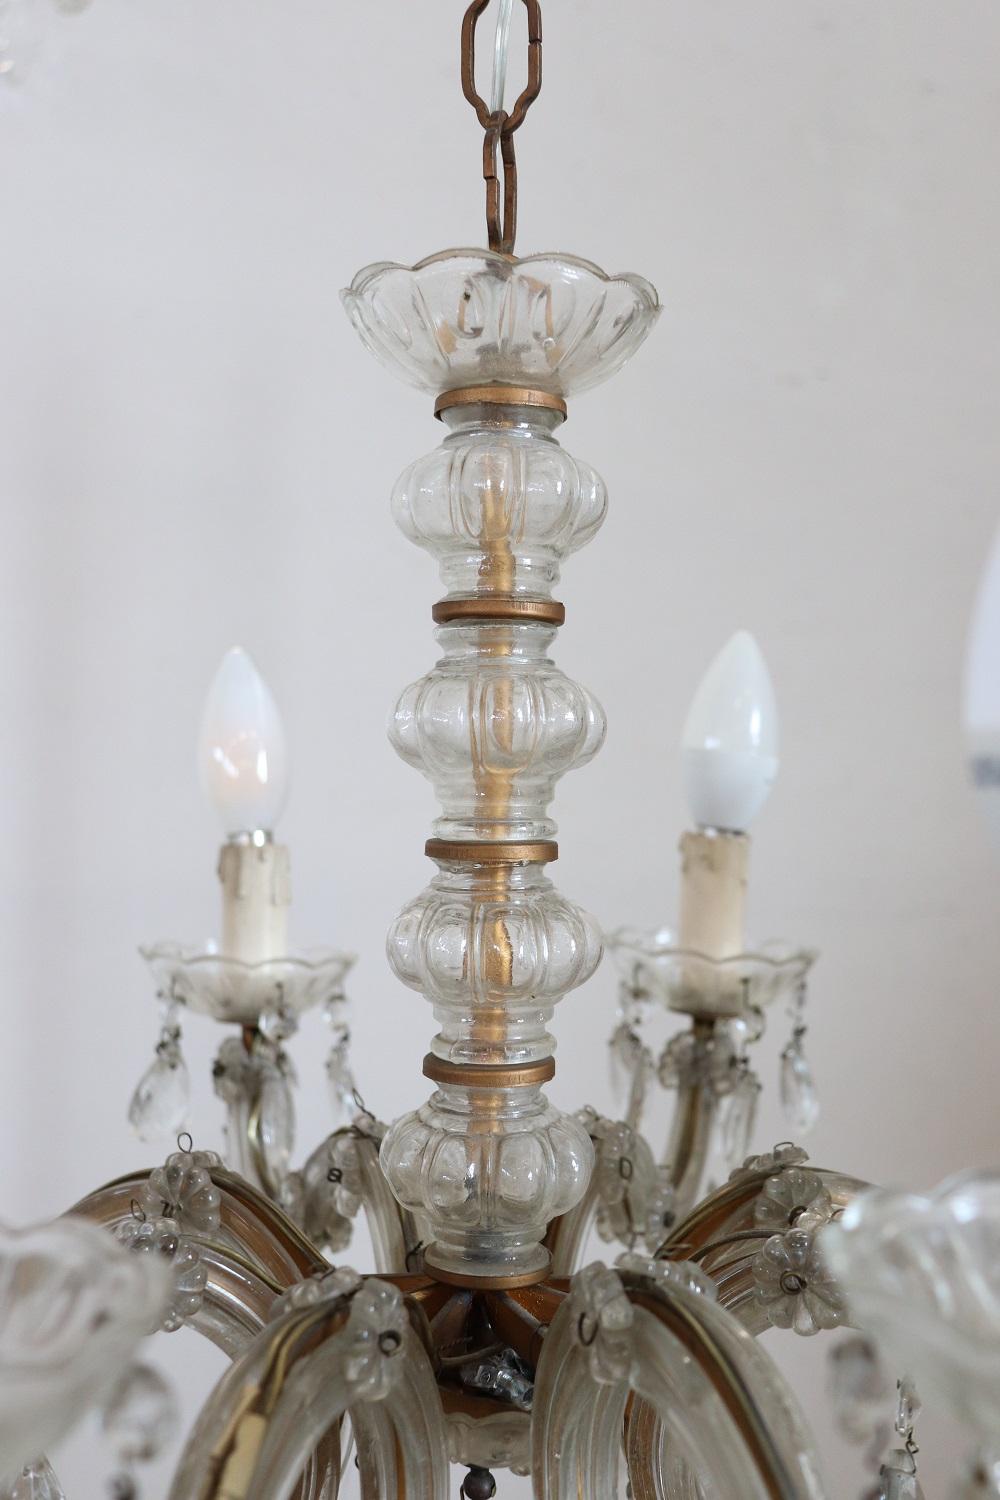 Late 19th Century 19th Century Italian Bronze and Crystals Chandelier For Sale